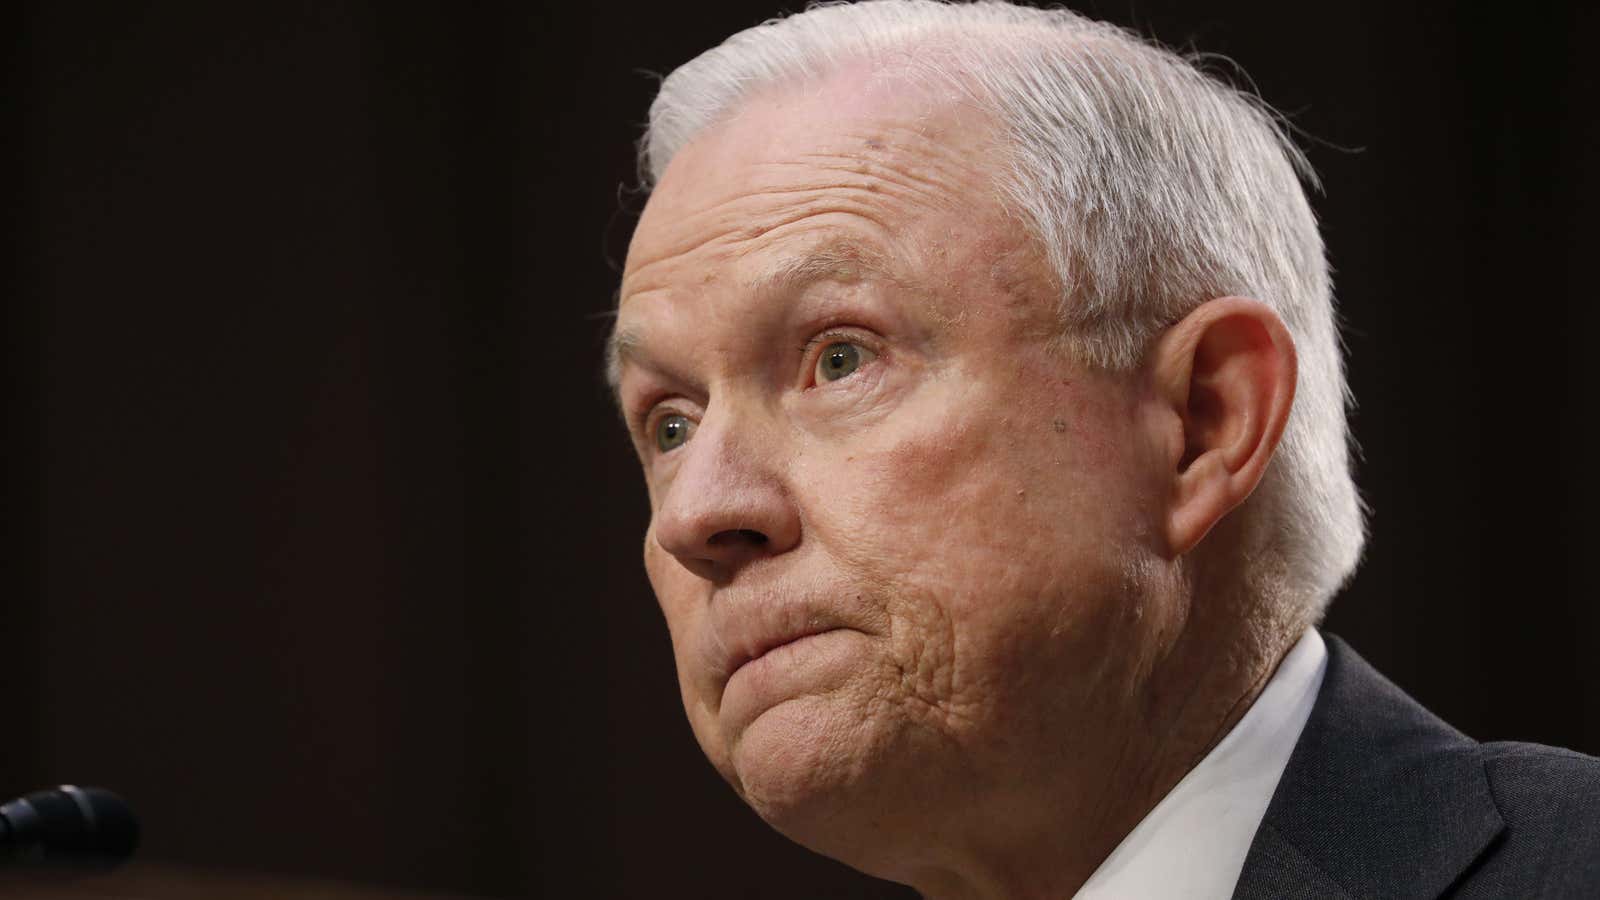 Sessions was uncertain about a wide range of subjects.